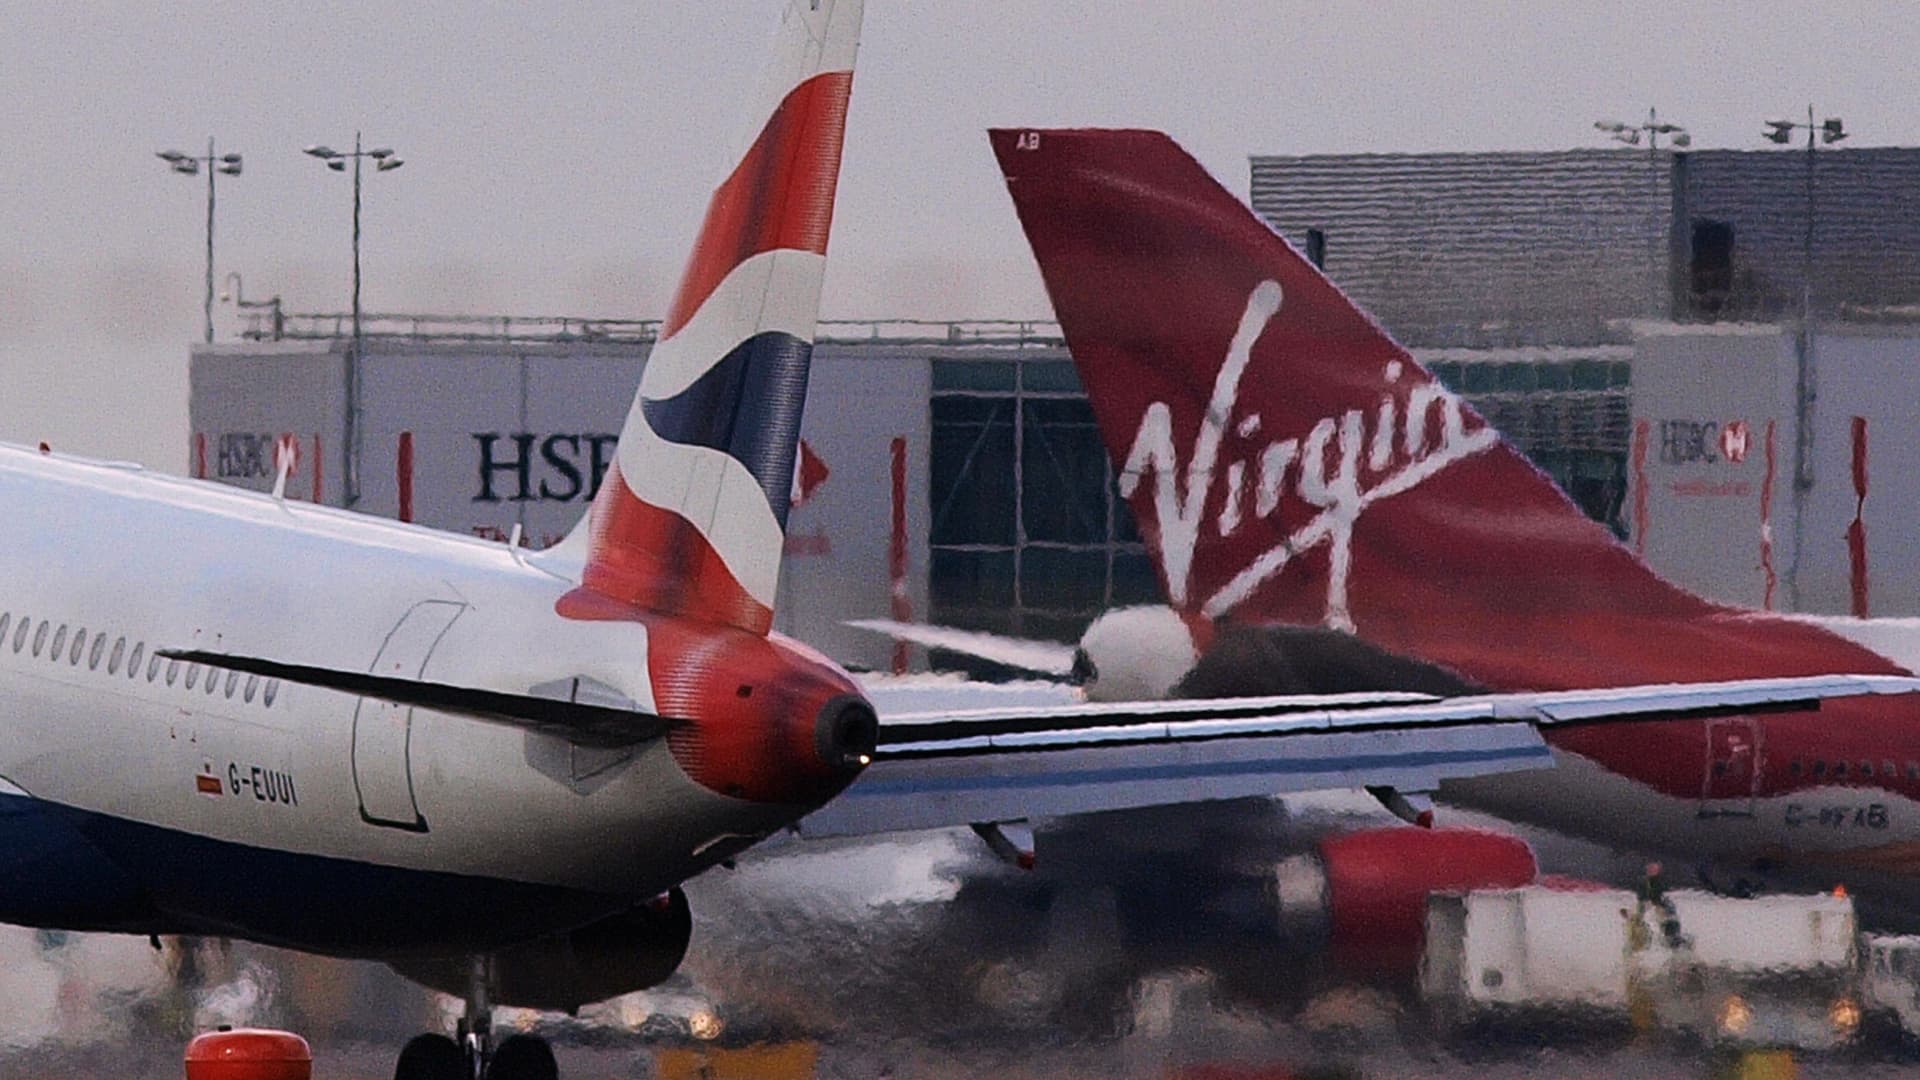 A British Airways plane and a Virgin Atlantic plane are pictured at London's Heathrow Airport.